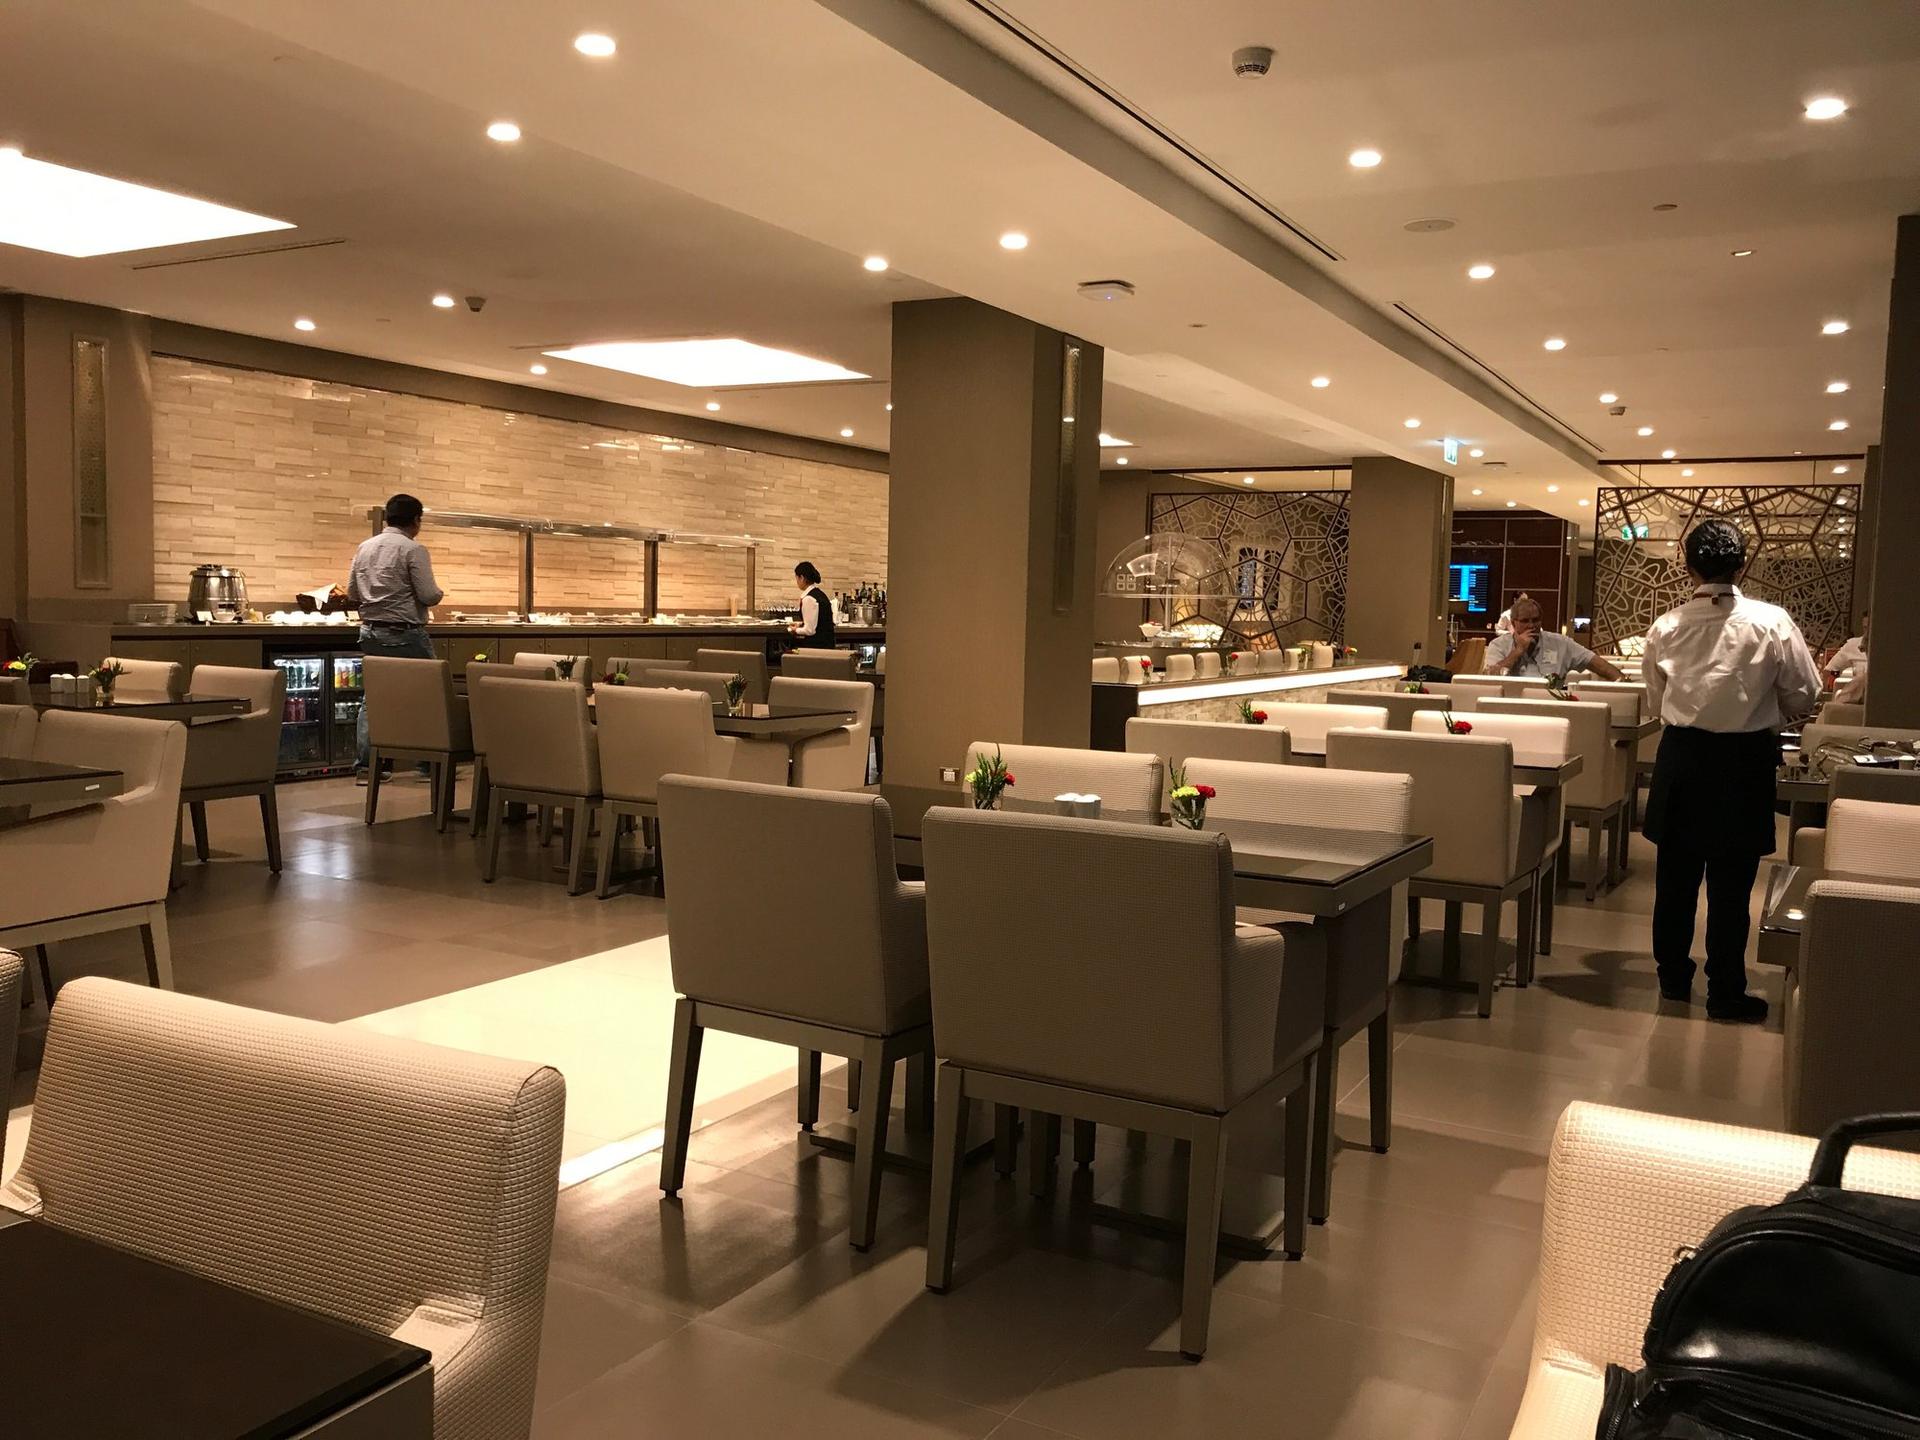 Emirates First Class Lounge image 12 of 25